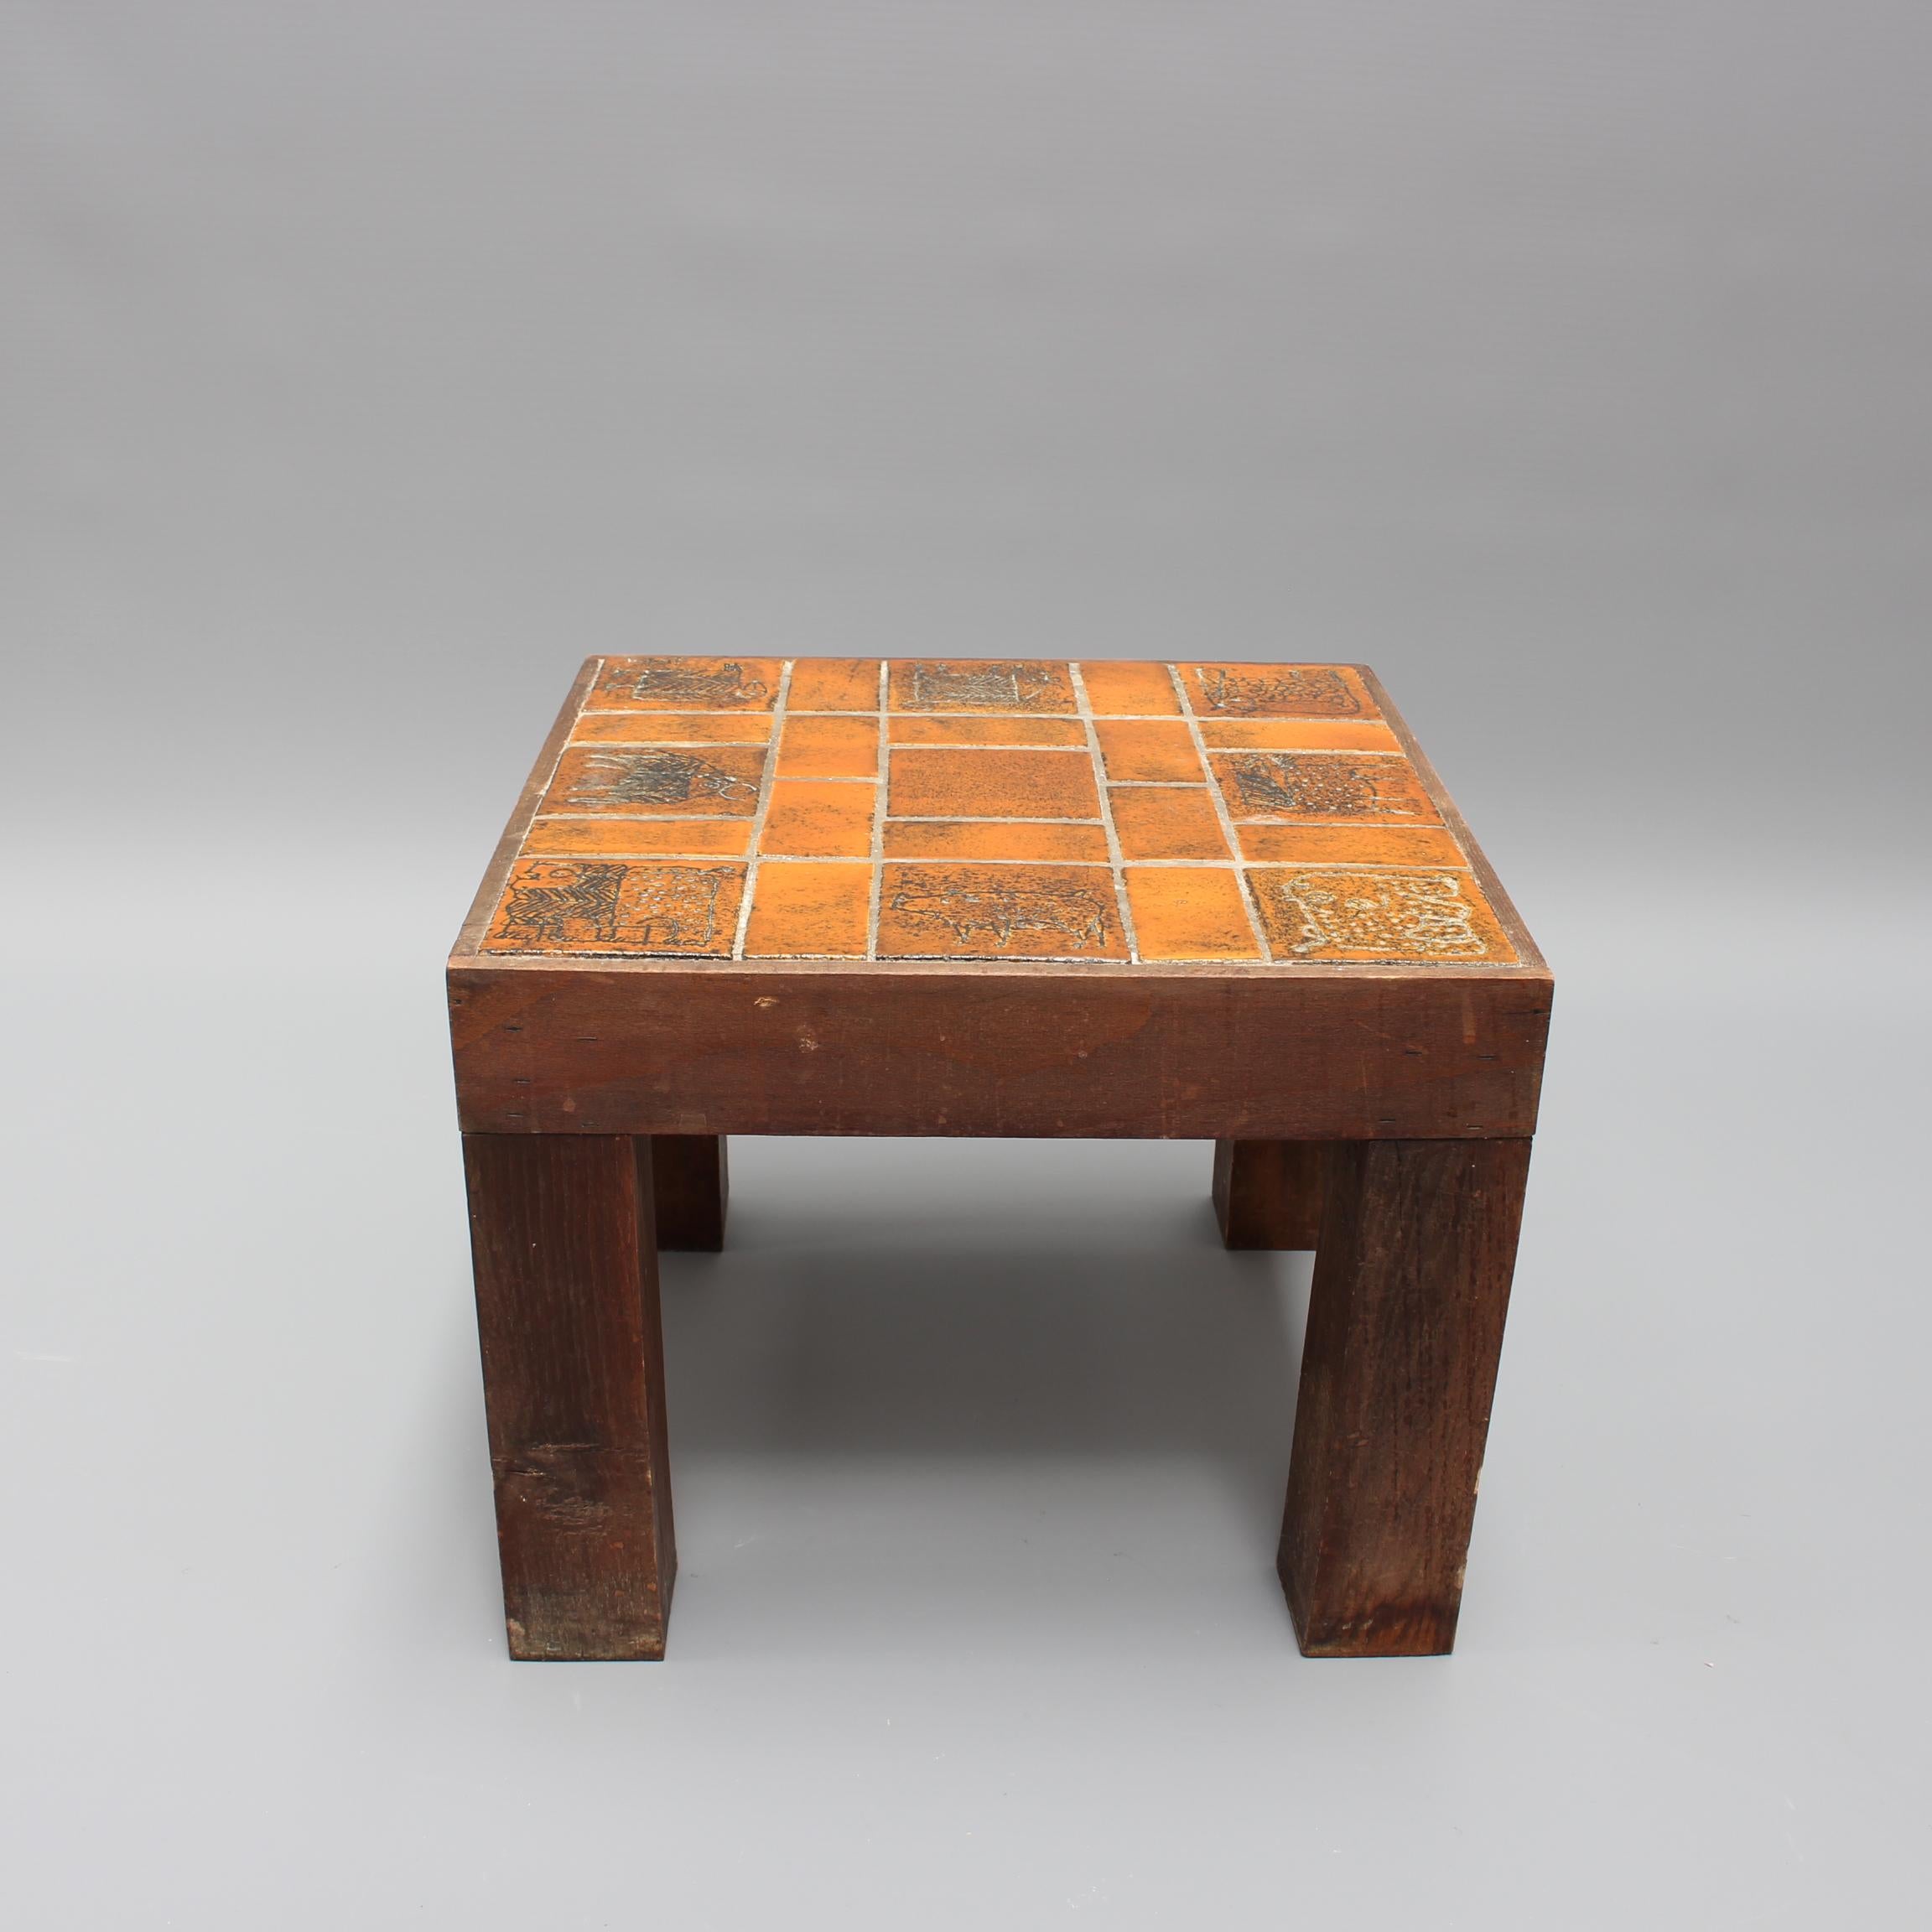 Vintage French Square Side Table with Ceramic Tile Top by Jacques Blin, c. 1950s For Sale 3